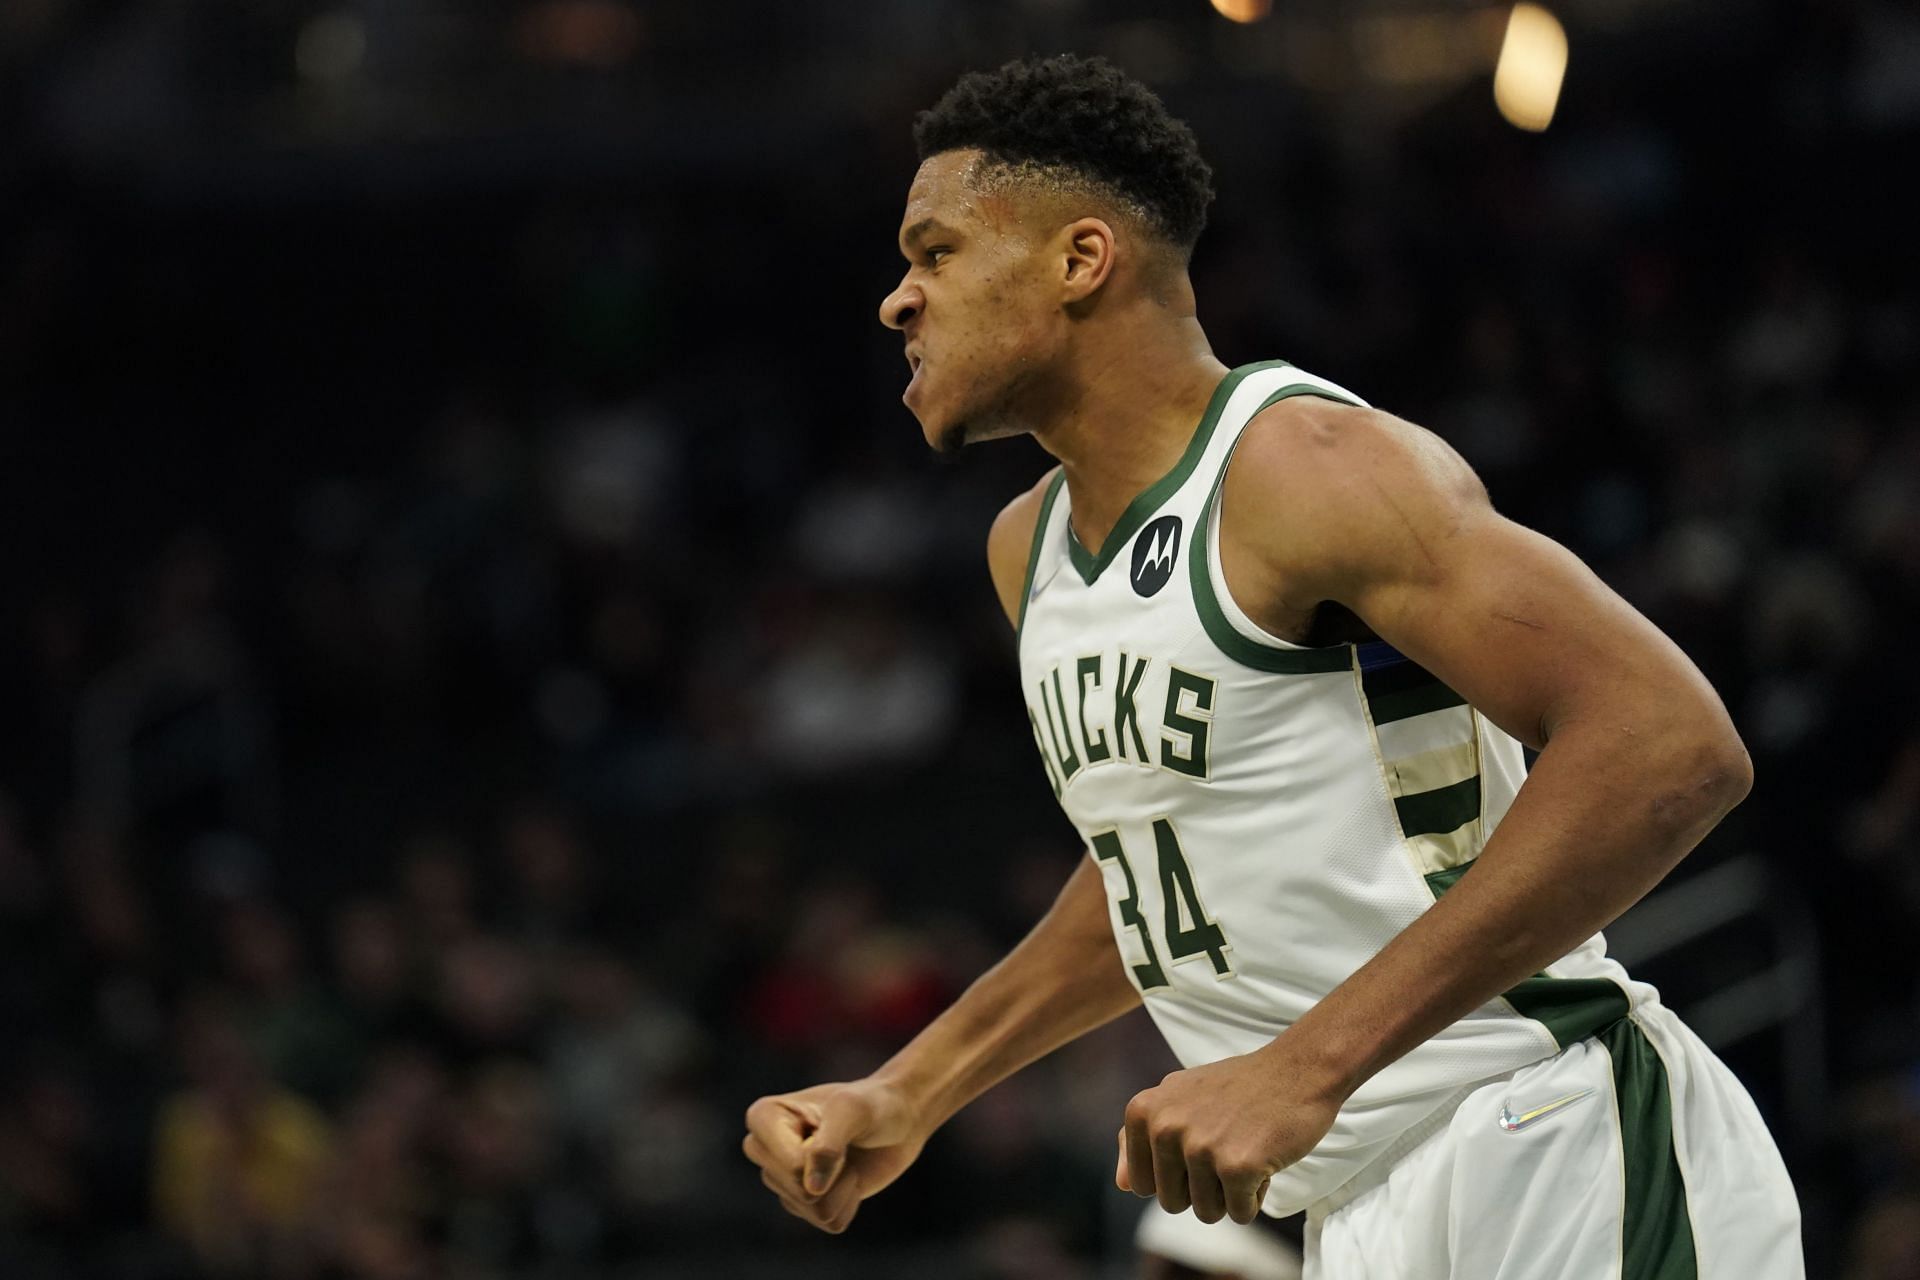 The Milwaukee Bucks are coming off an impressive 127-104 win over the Brooklyn Nets